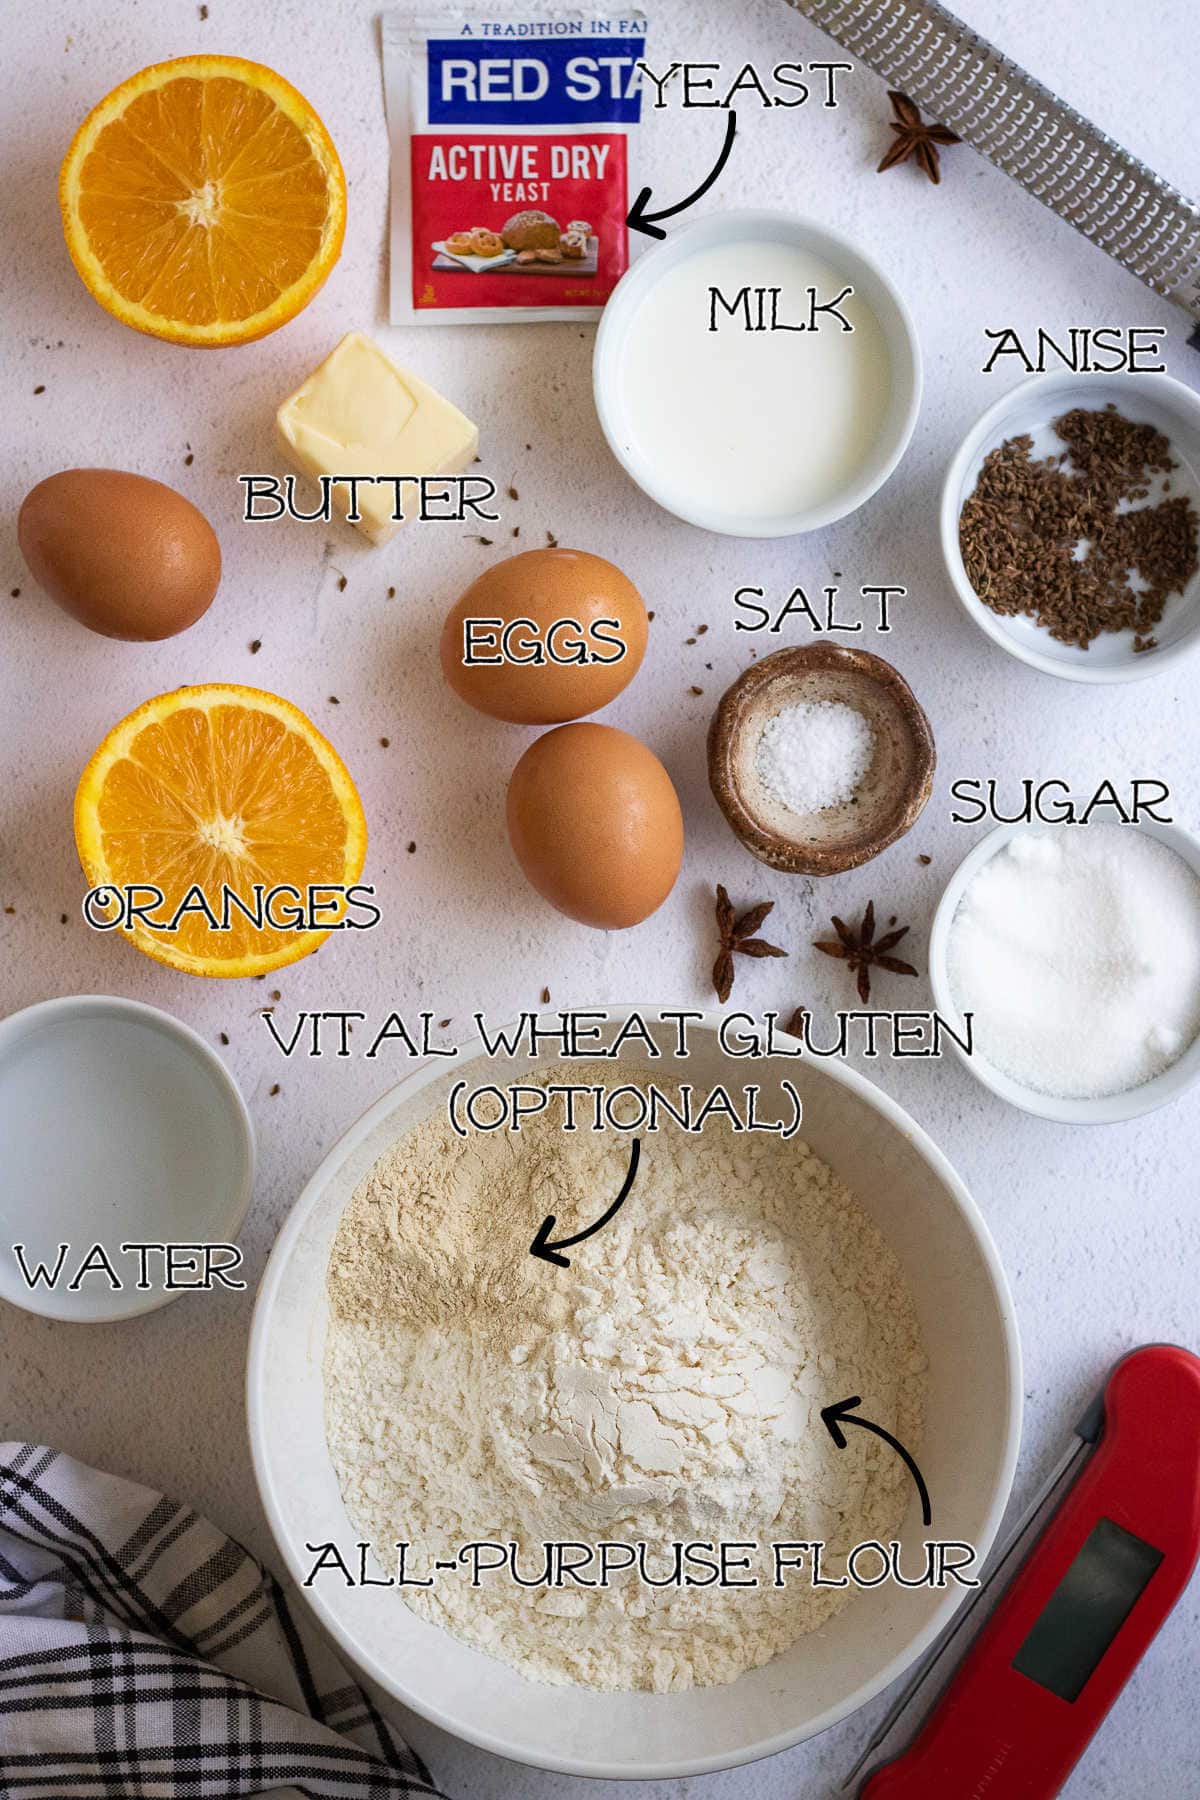 Labeled ingredients for day of the dead bread.